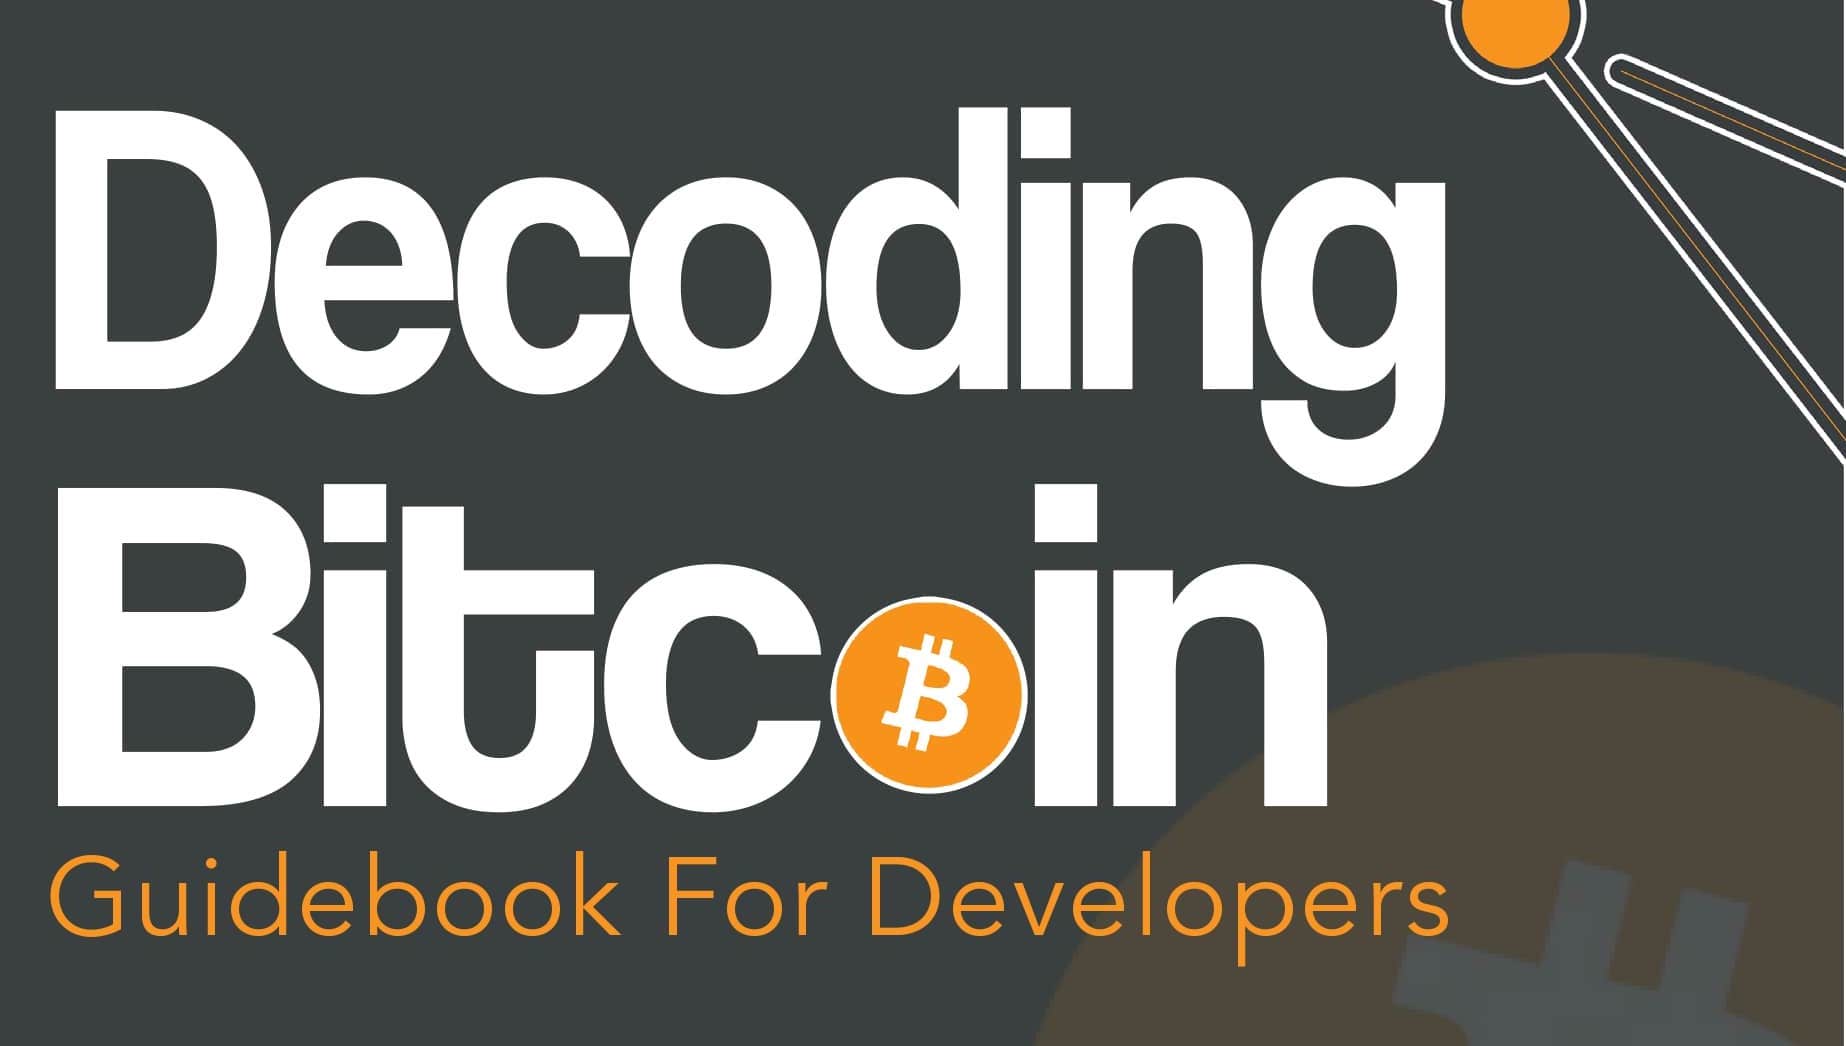 Image of Decoding Bitcoin Guidebook for Developers Pre-Launch